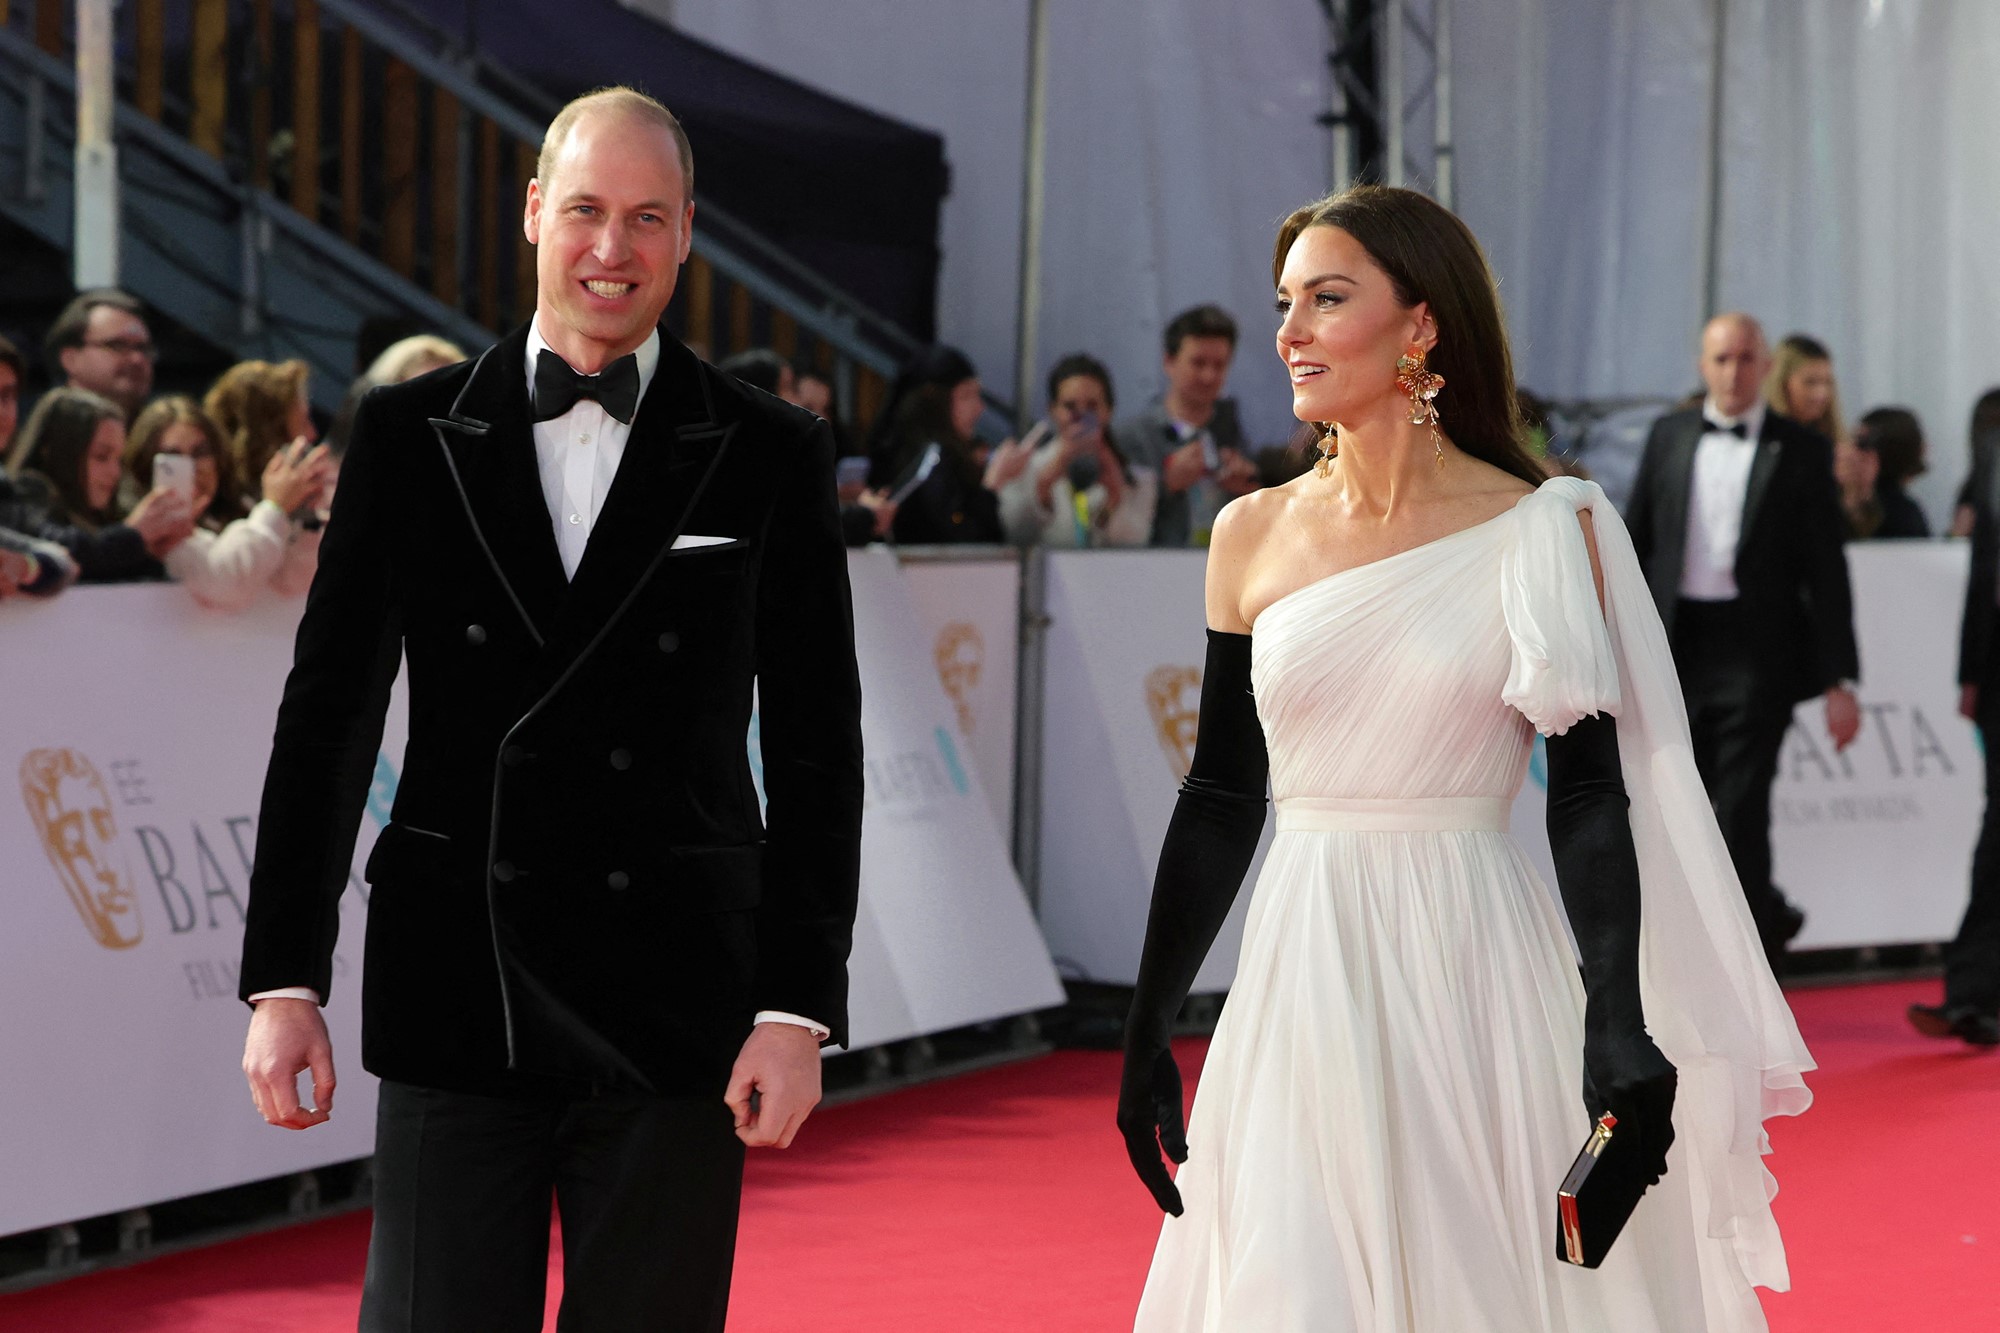 William and Kate walking on the red carpet